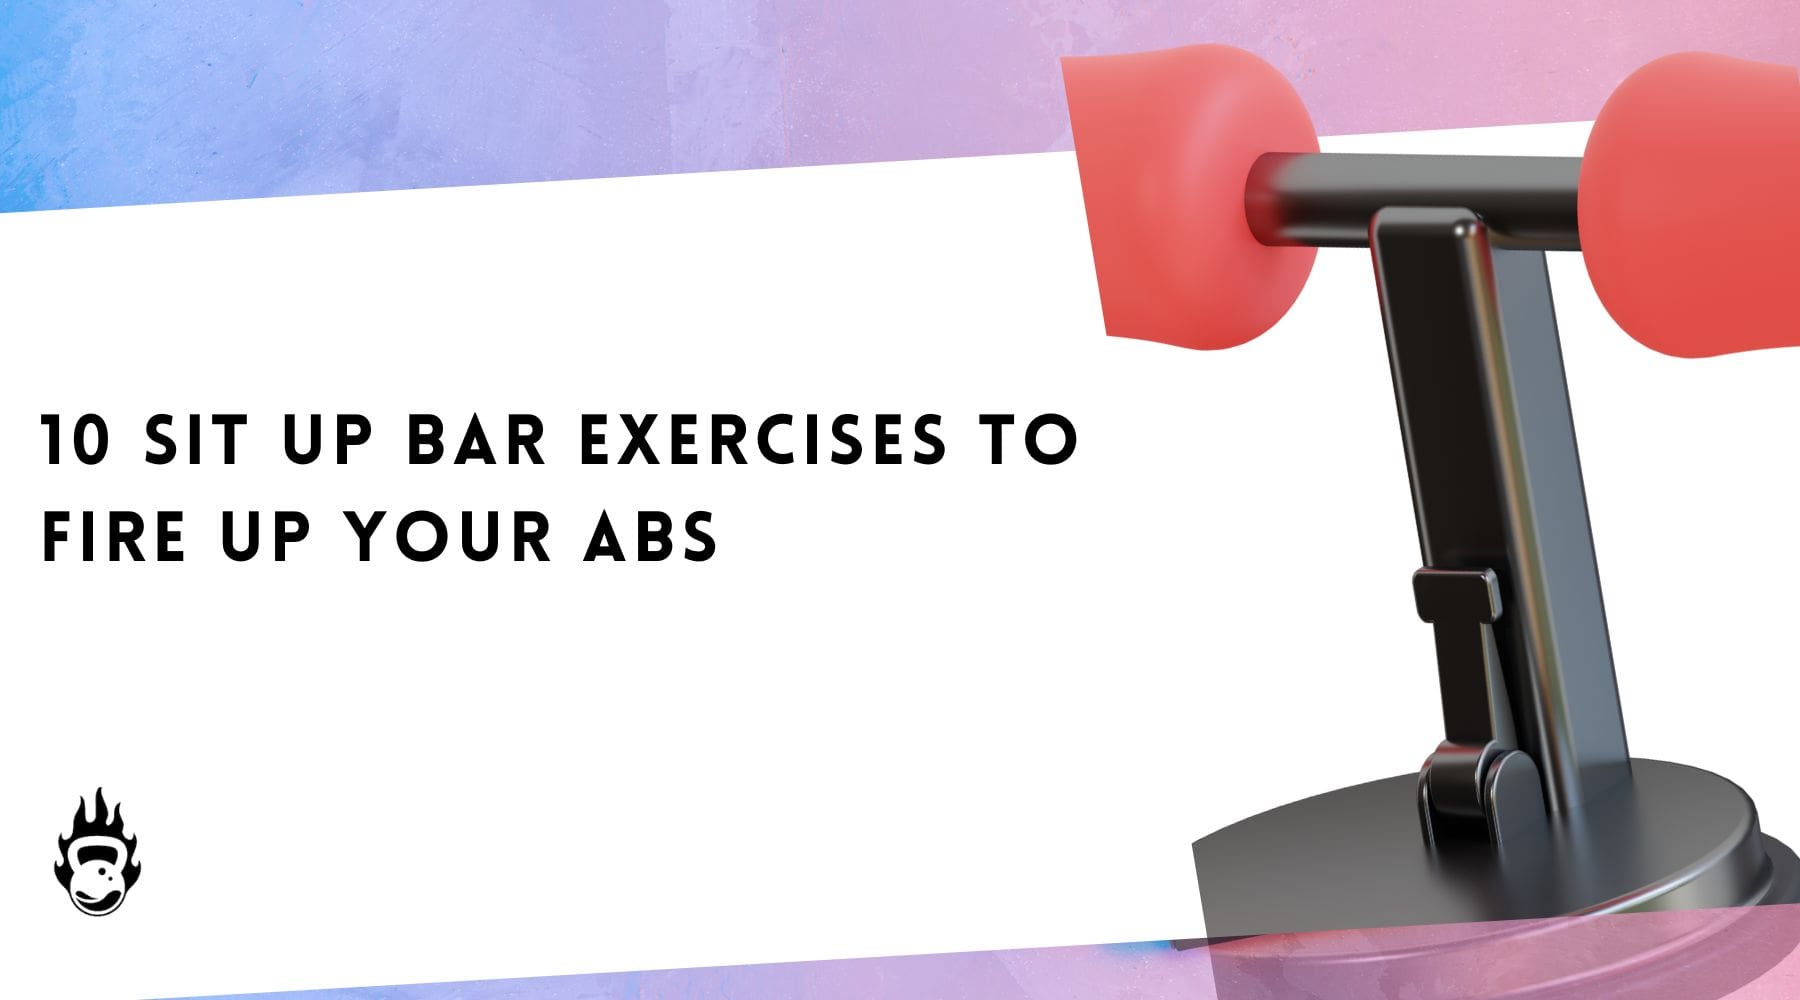 Abs Up Exercises 10 To Your – Sit Bar Fire Up